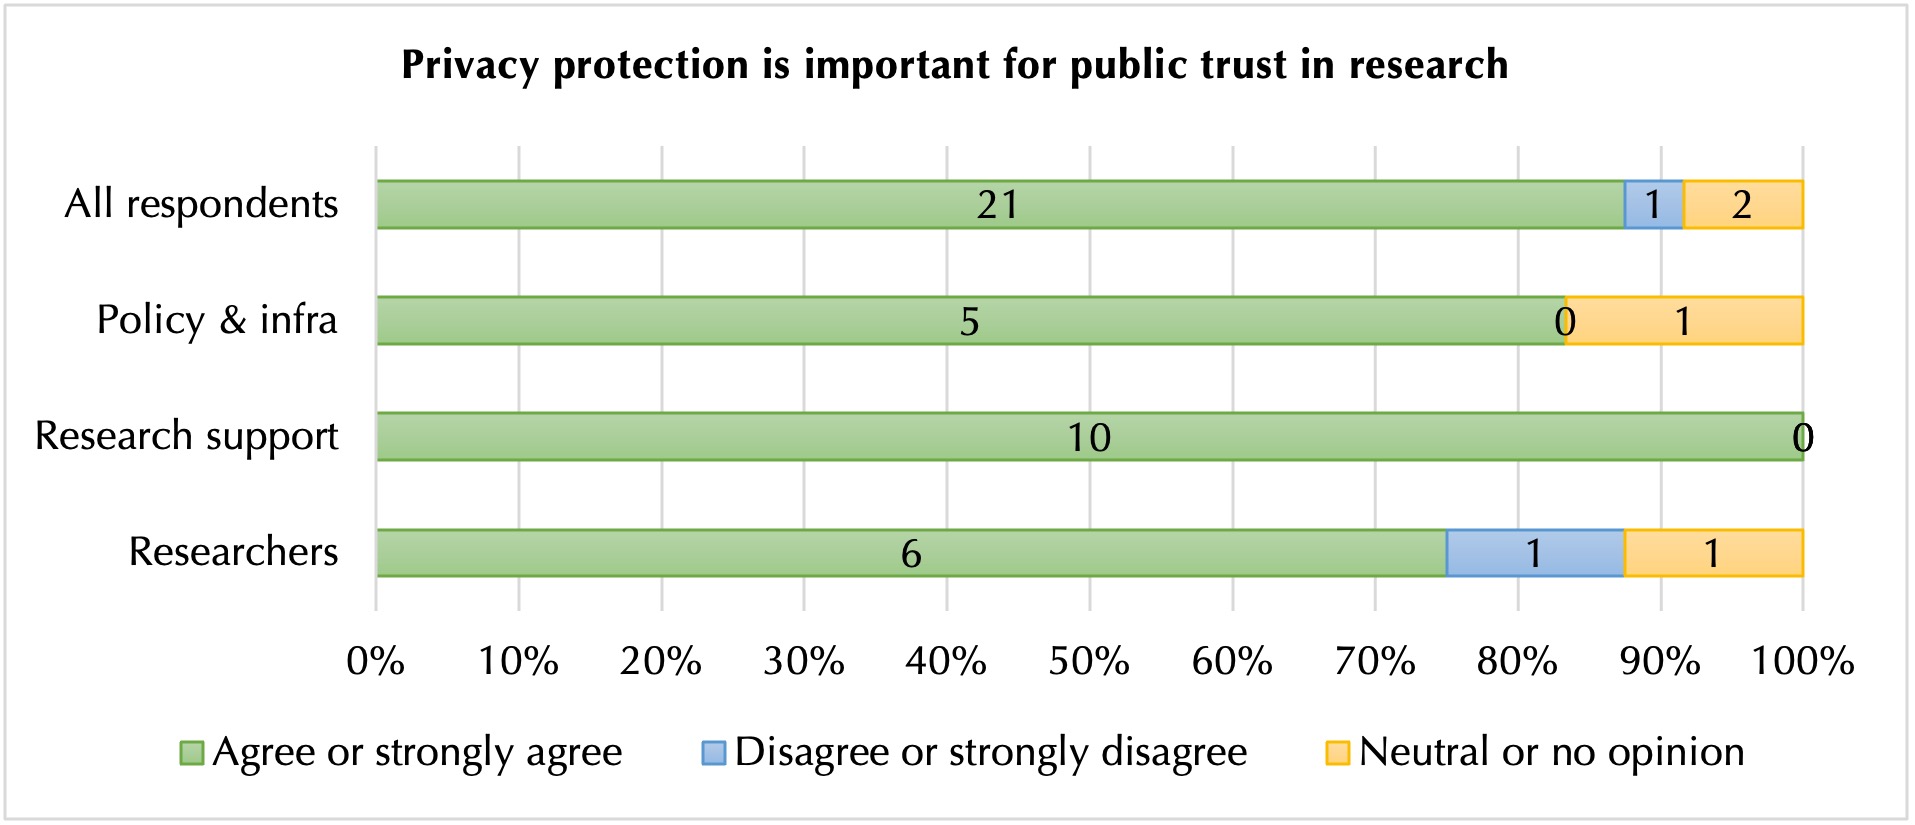 Figure 3: Privacy protection and public trust